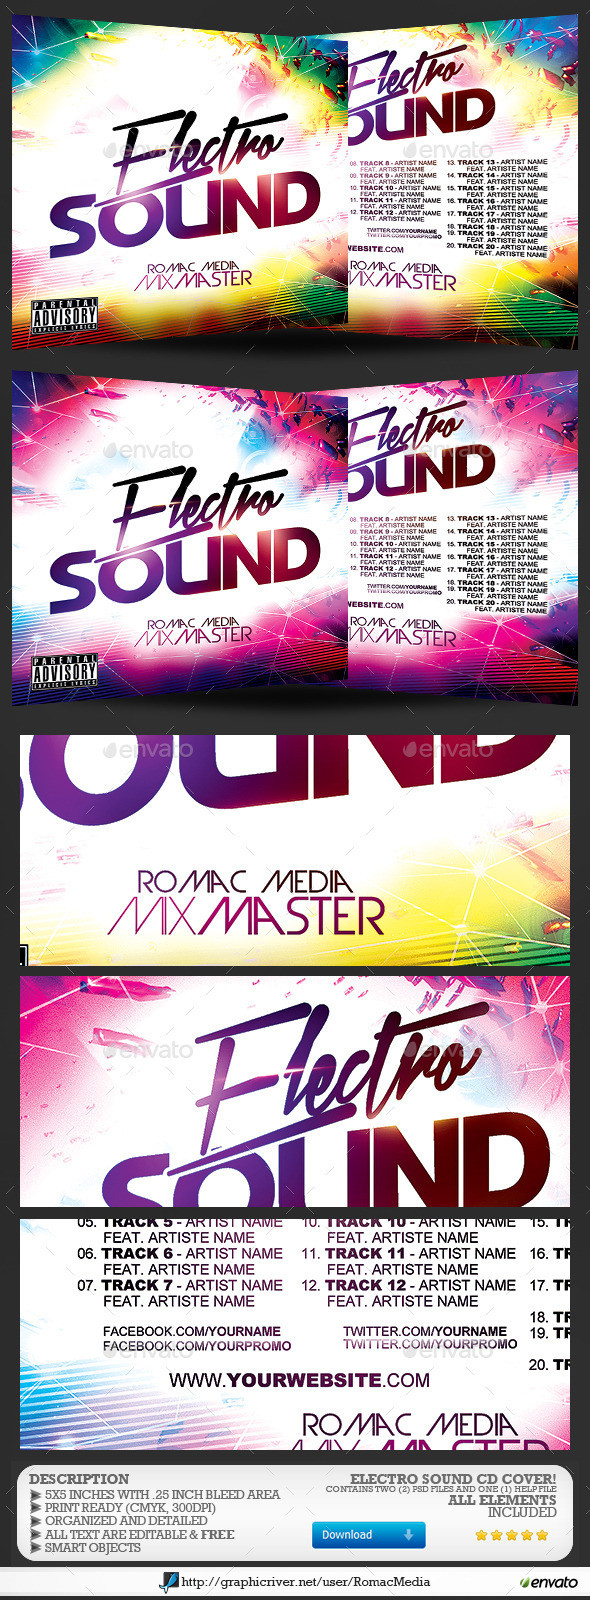 Electro 20sound 20cd 20cover 20preview 20image